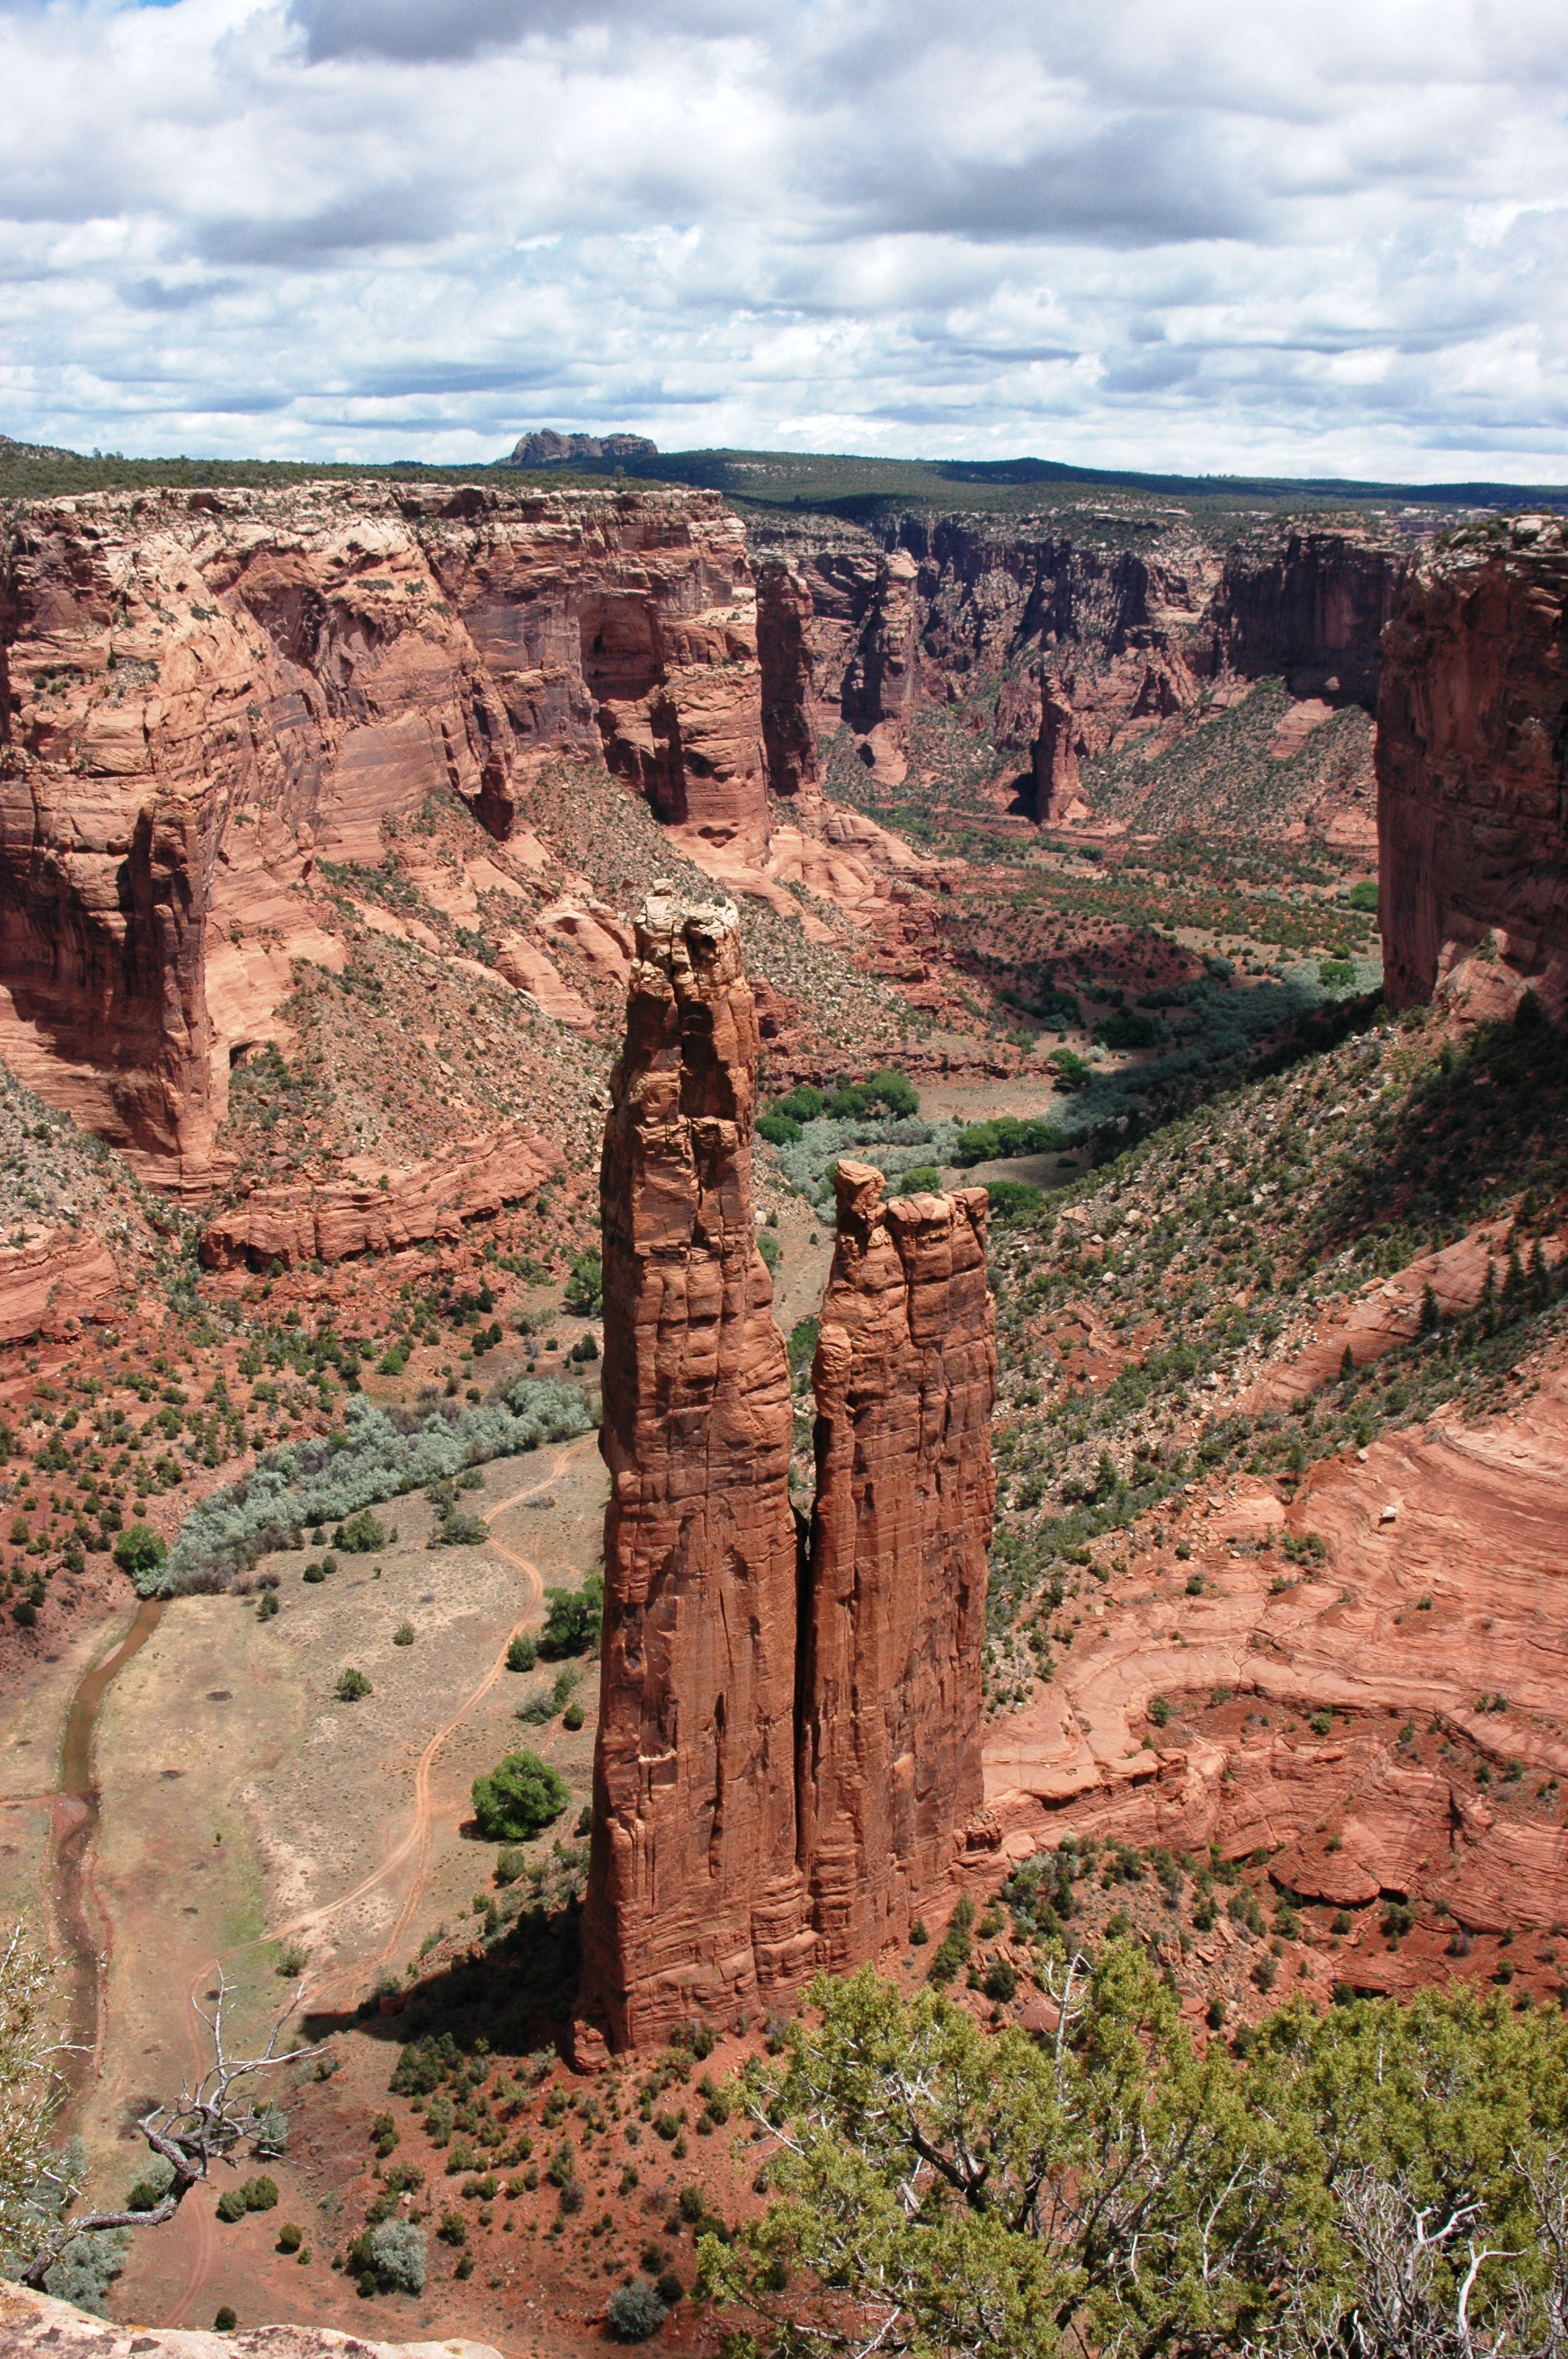 View of Spider Rock from the overlook